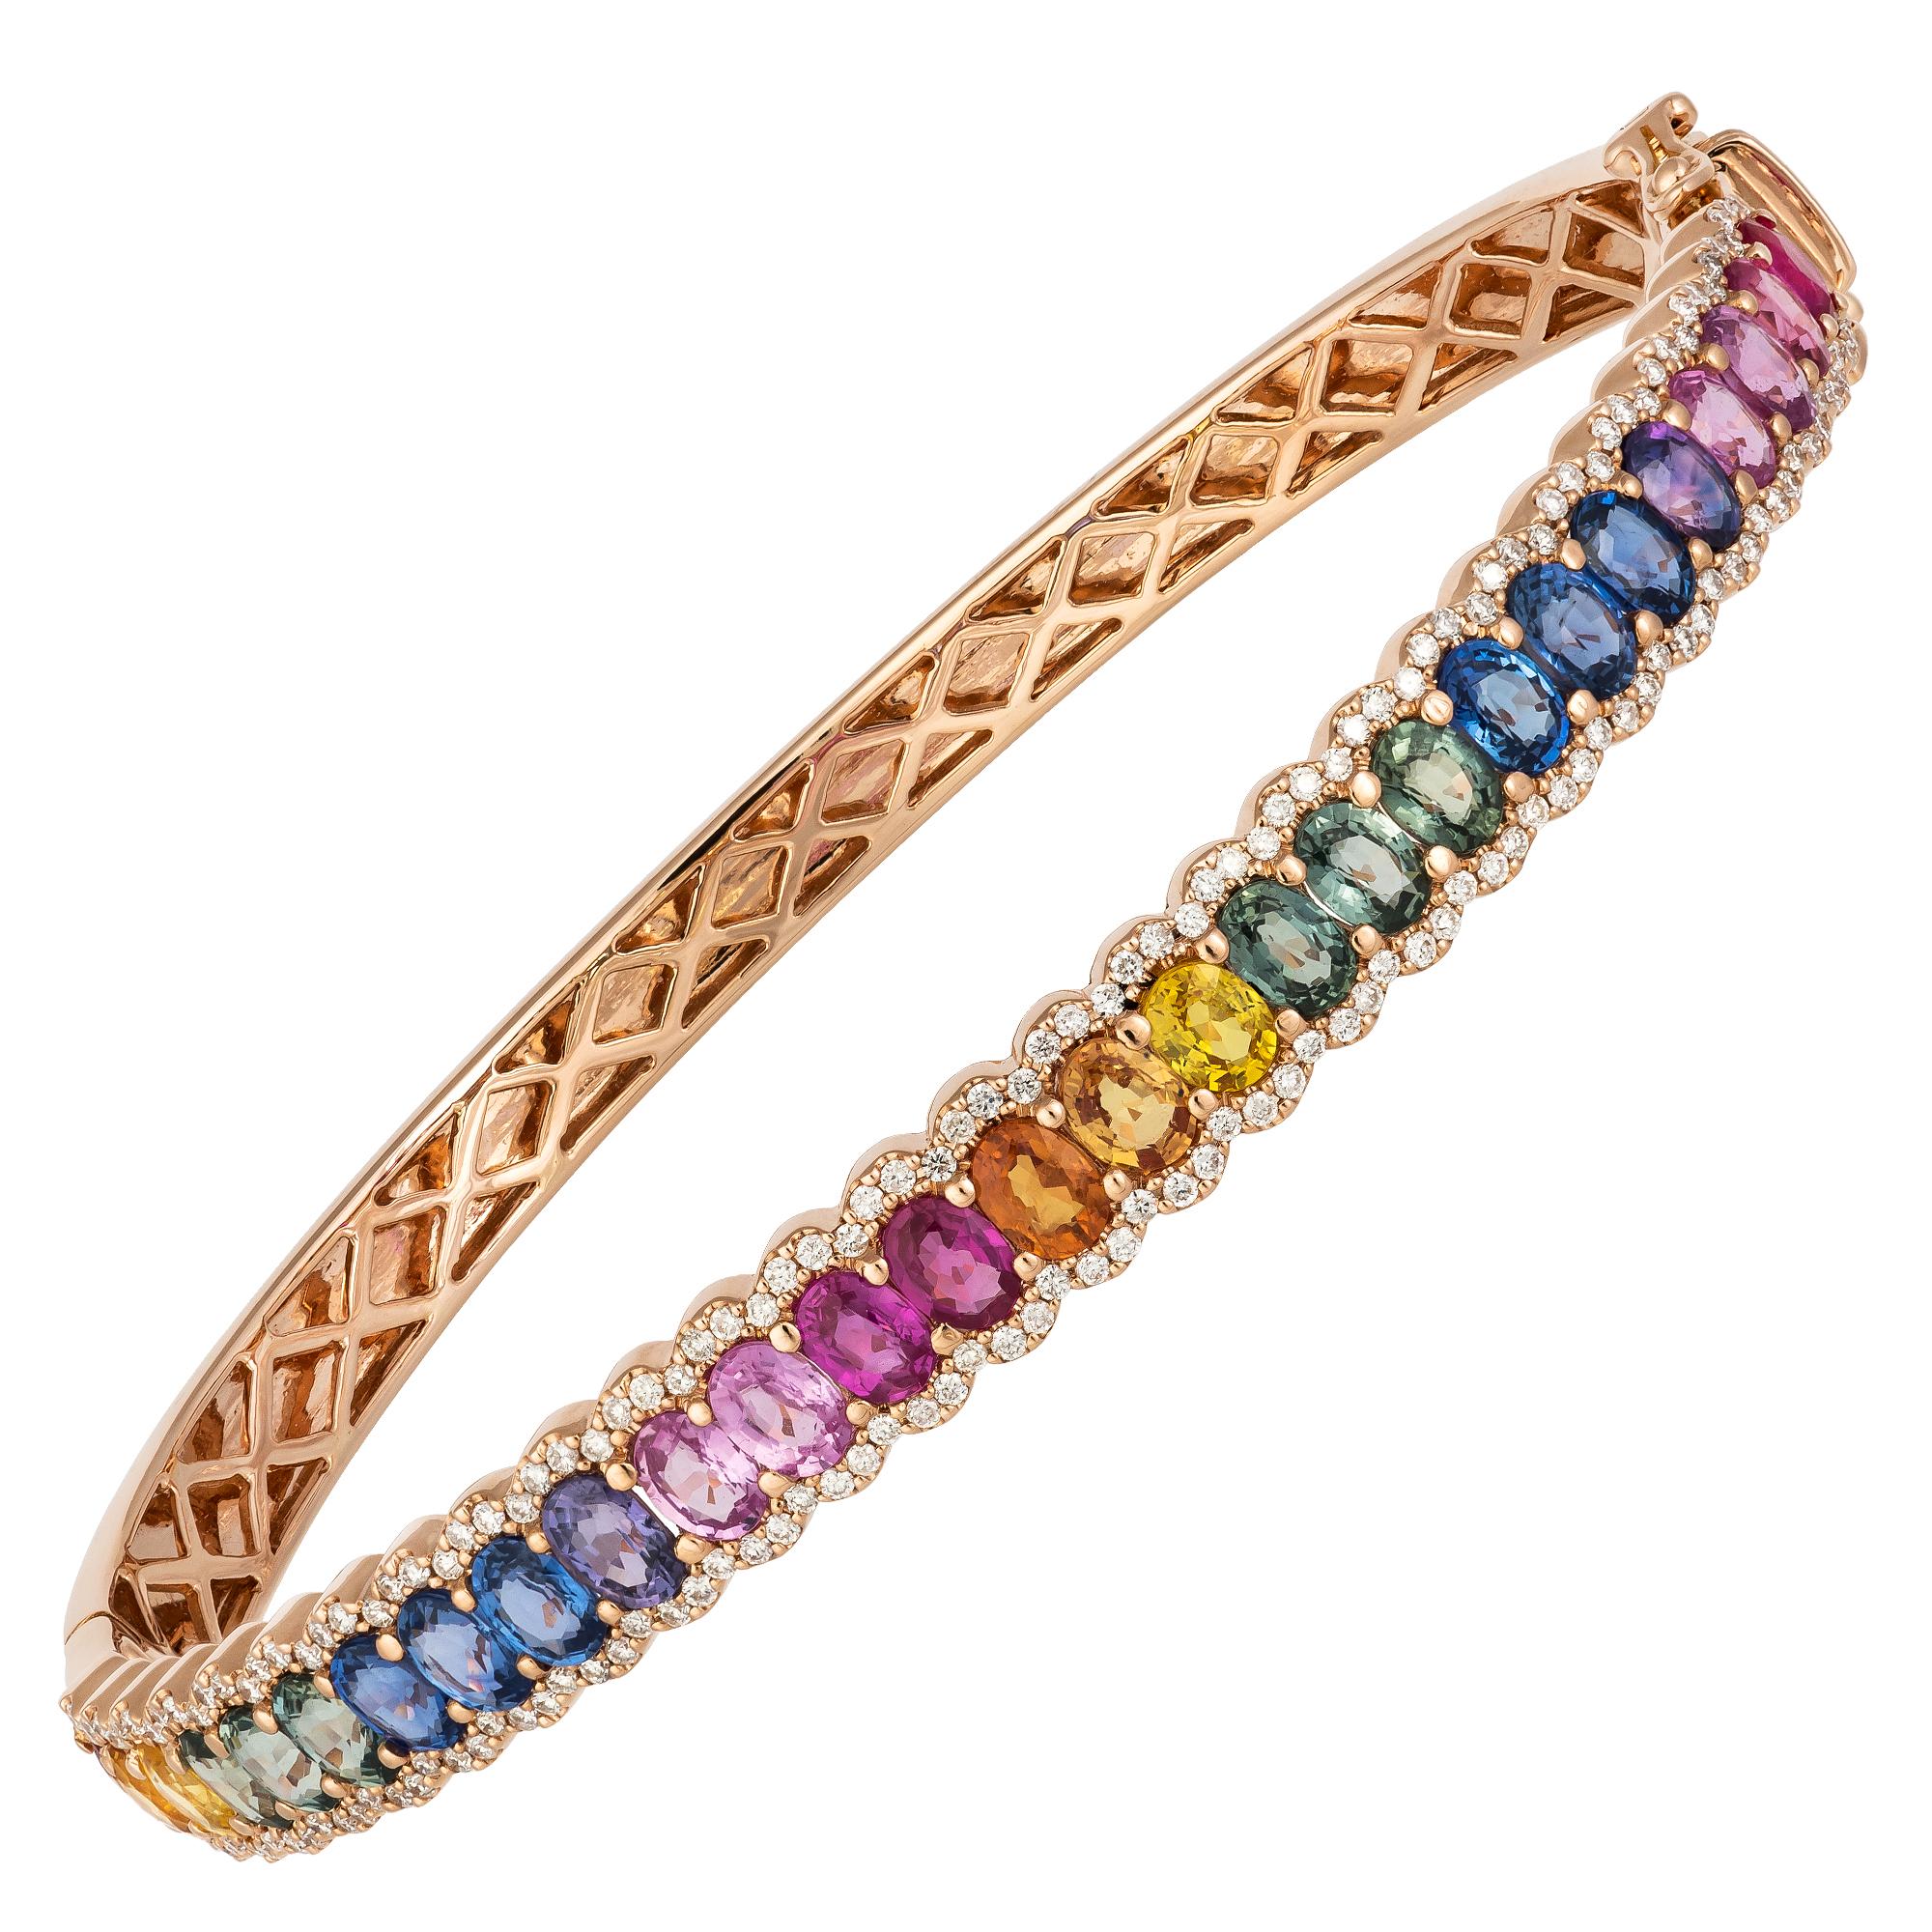 Round Cut Oval Cut Colourful Sapphire Diamond Modern Bangle Bracelet for Her 18K Rose Gold For Sale